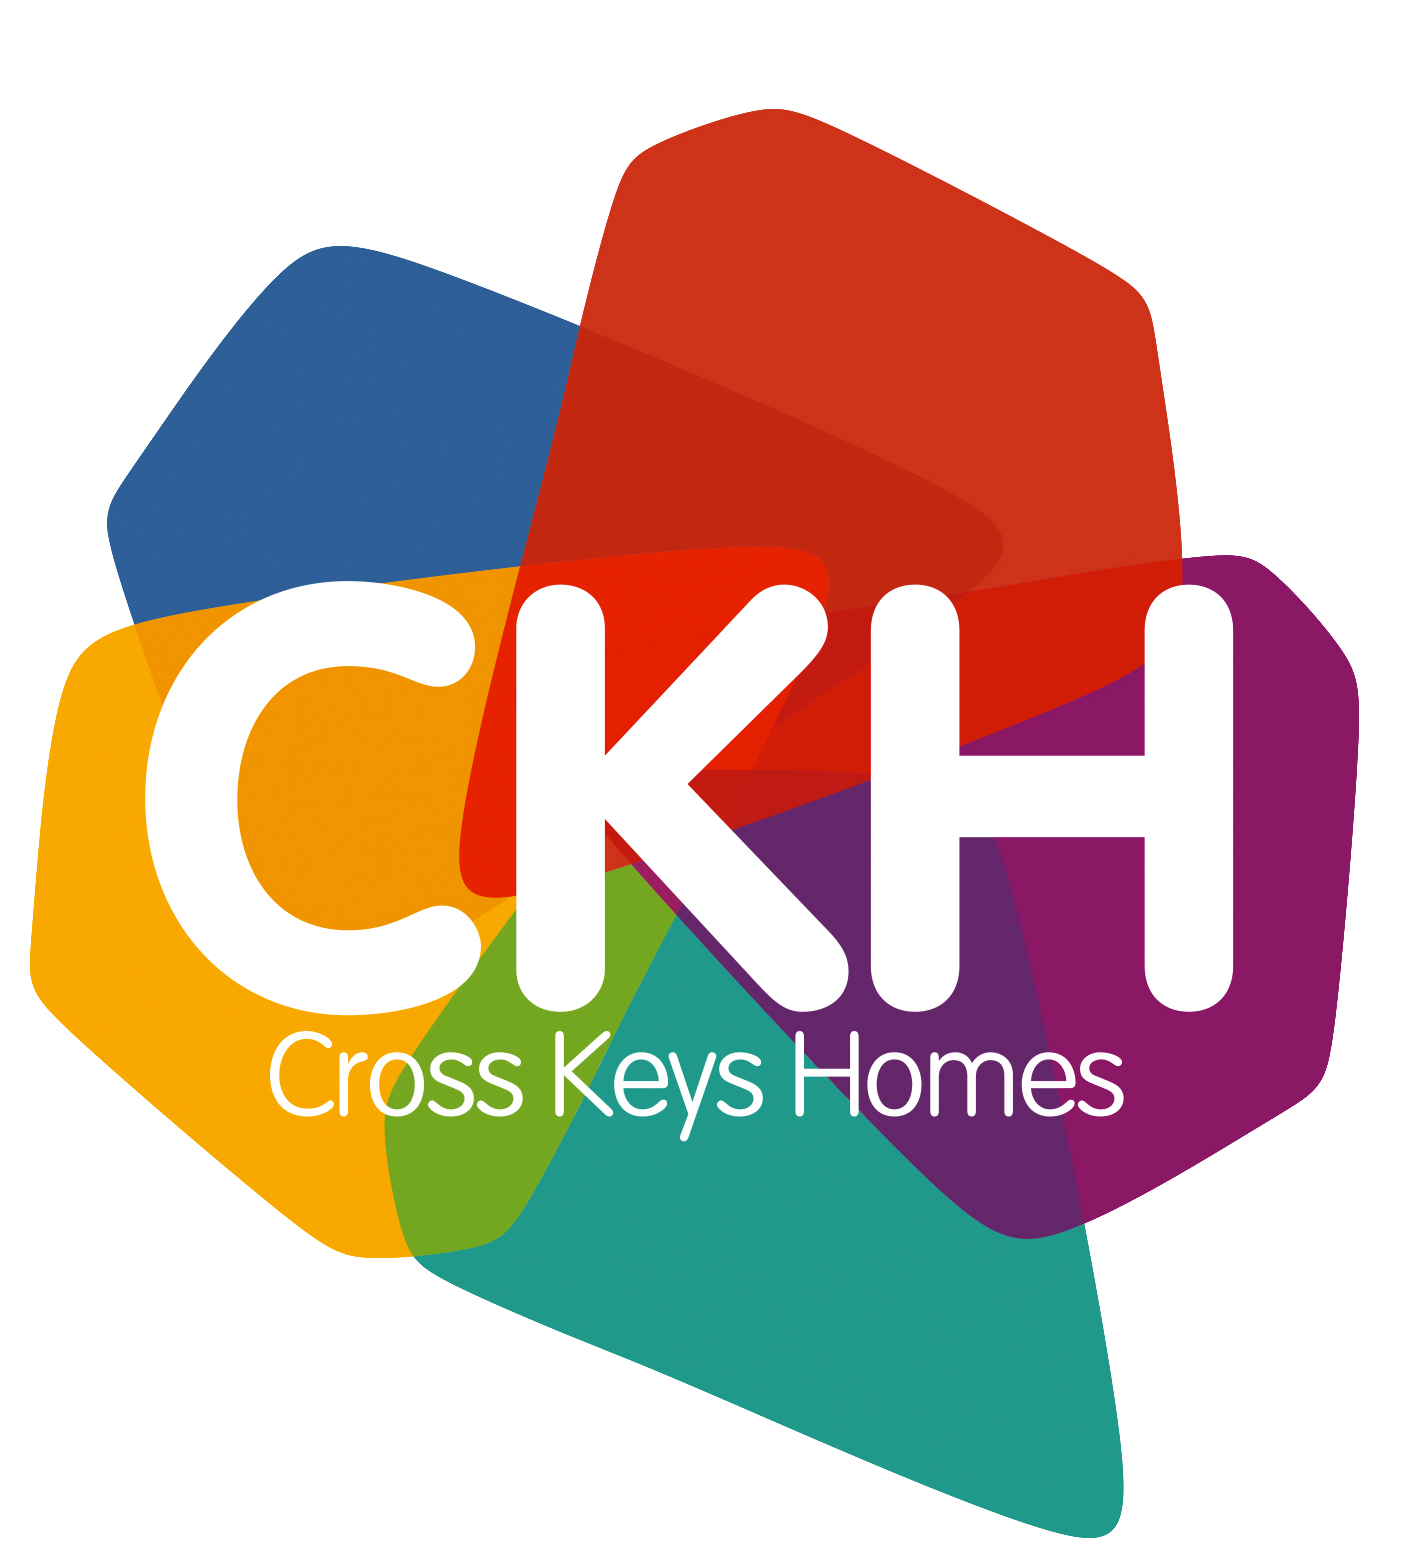 Welcome to Cross Keys Homes - find everything you need as a new ...